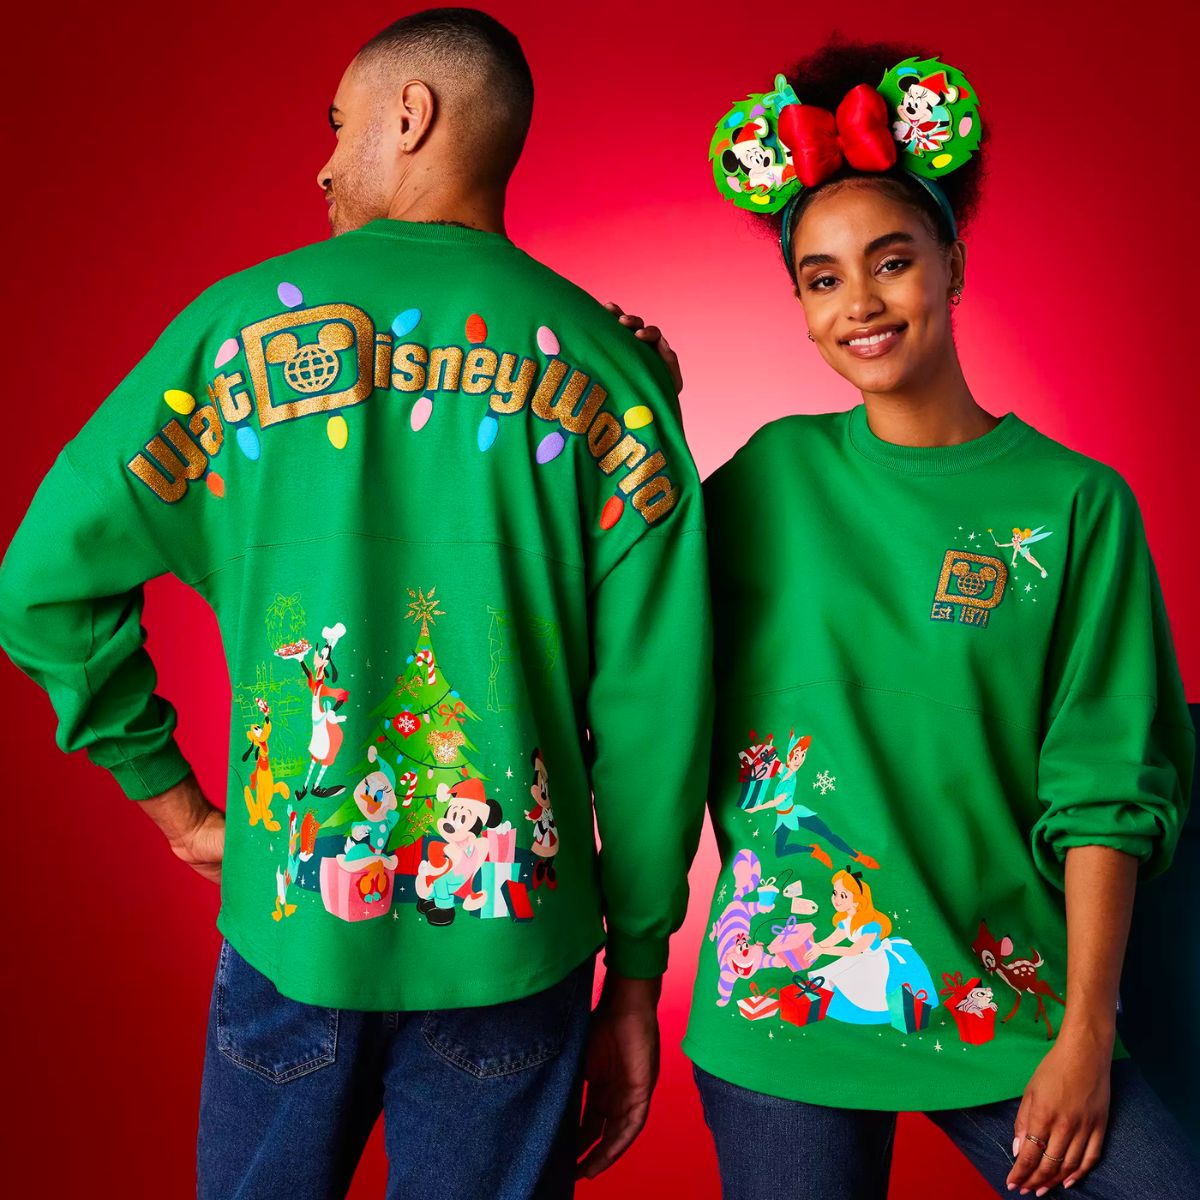 a male and female model wearing Disney holiday spirit jerseys in green